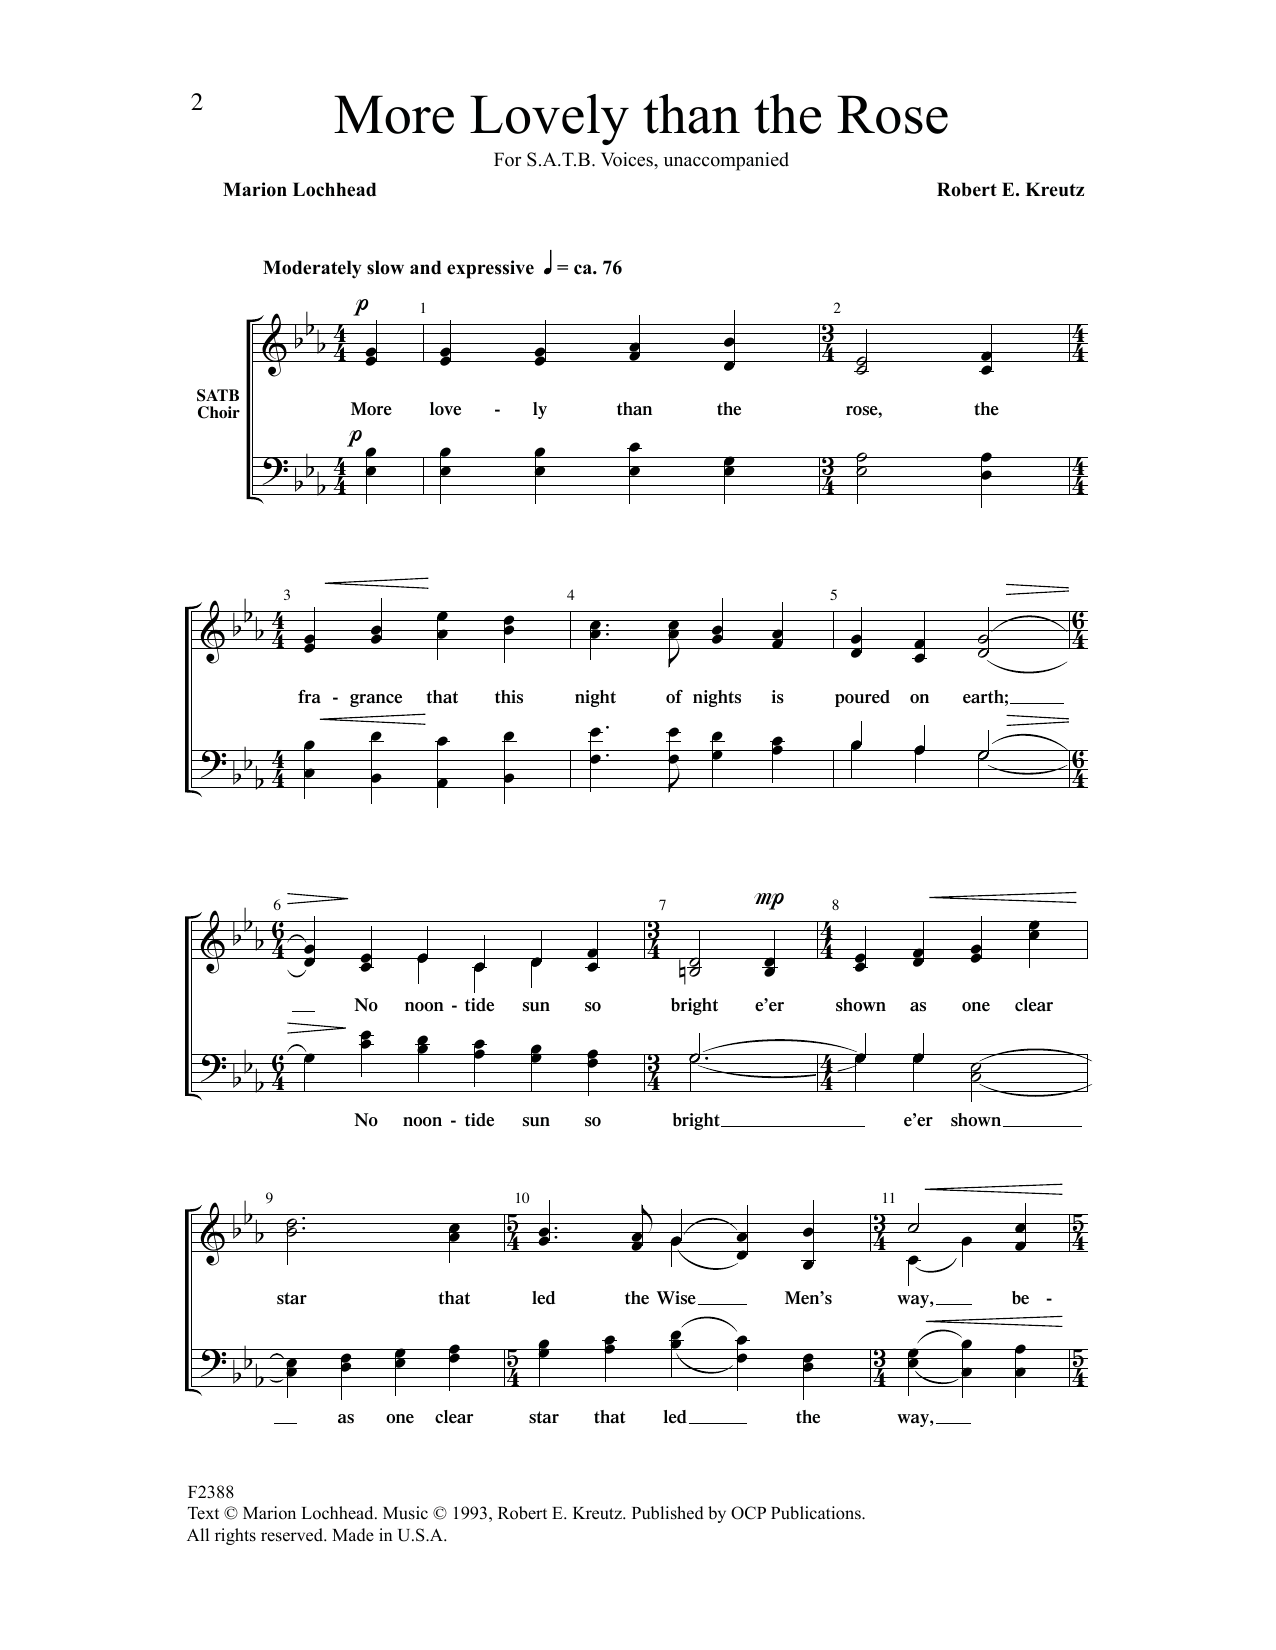 Download Marion Lochhead More Lovely than the Rose Sheet Music